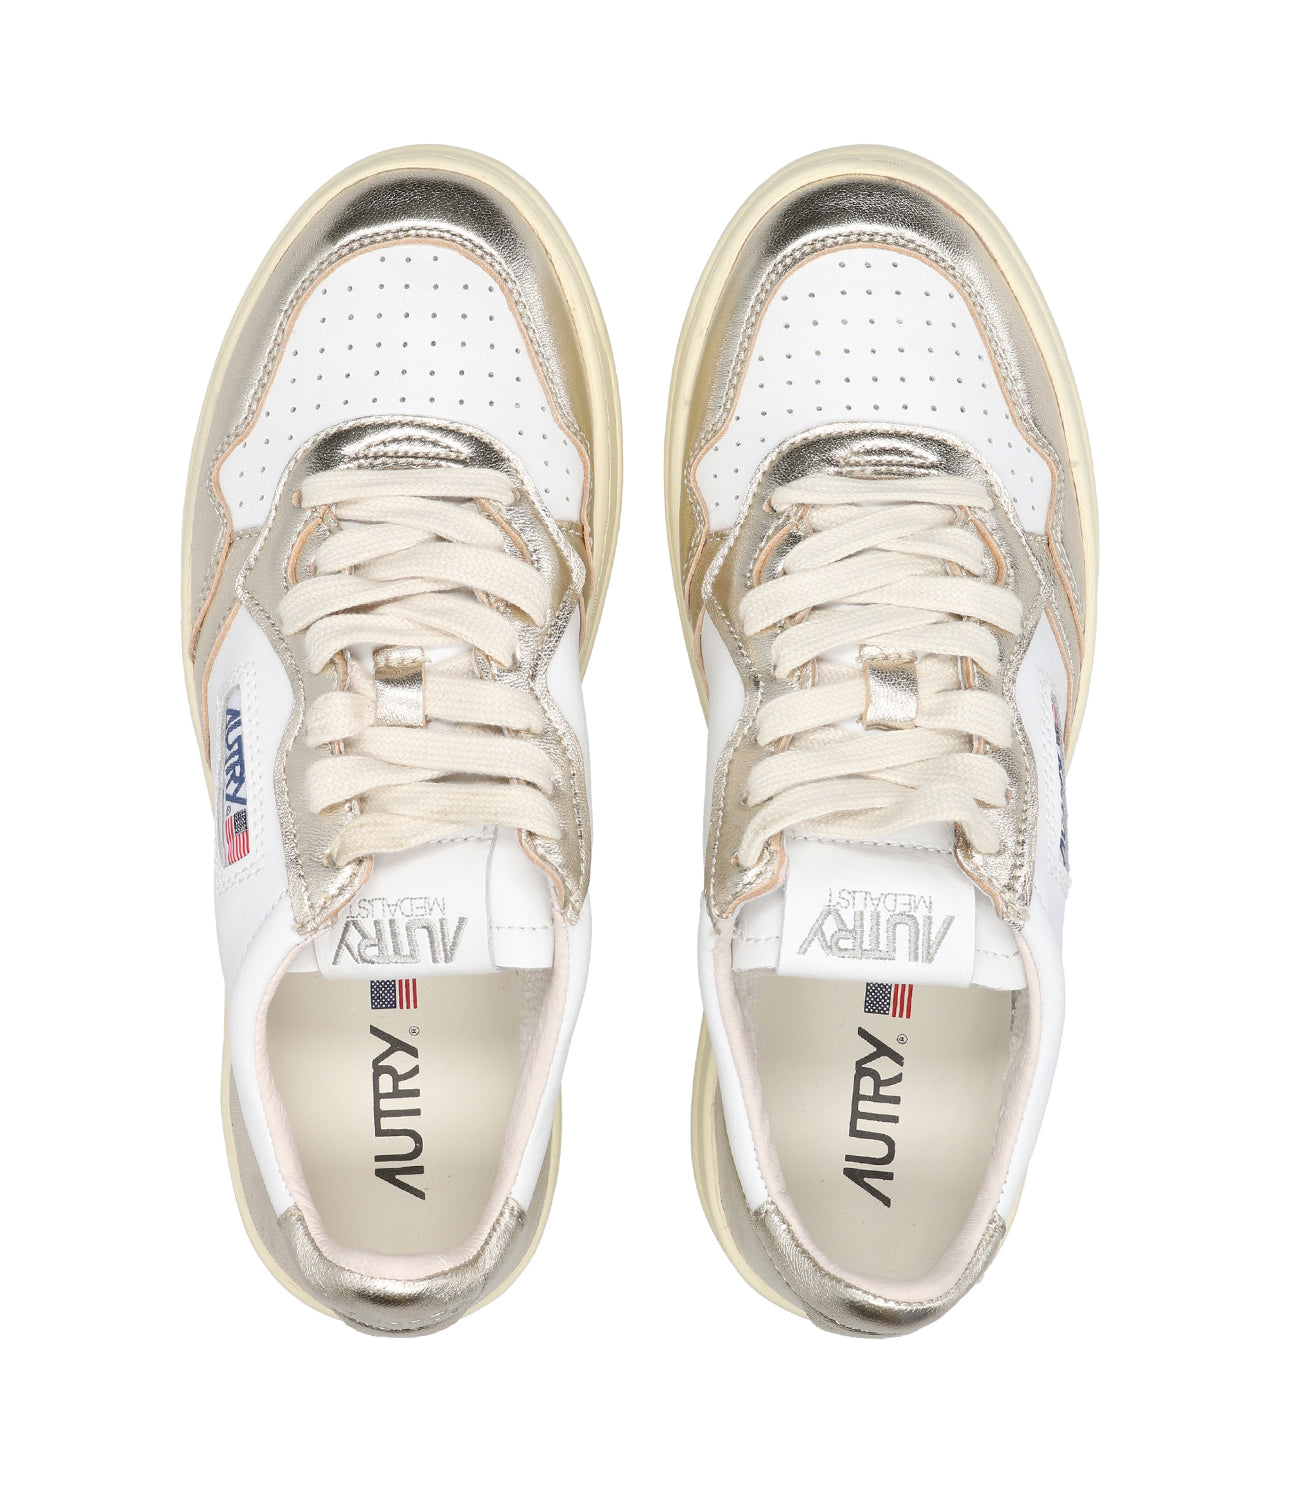 Autry | Sneakers Medalist Low Bianca e Platino